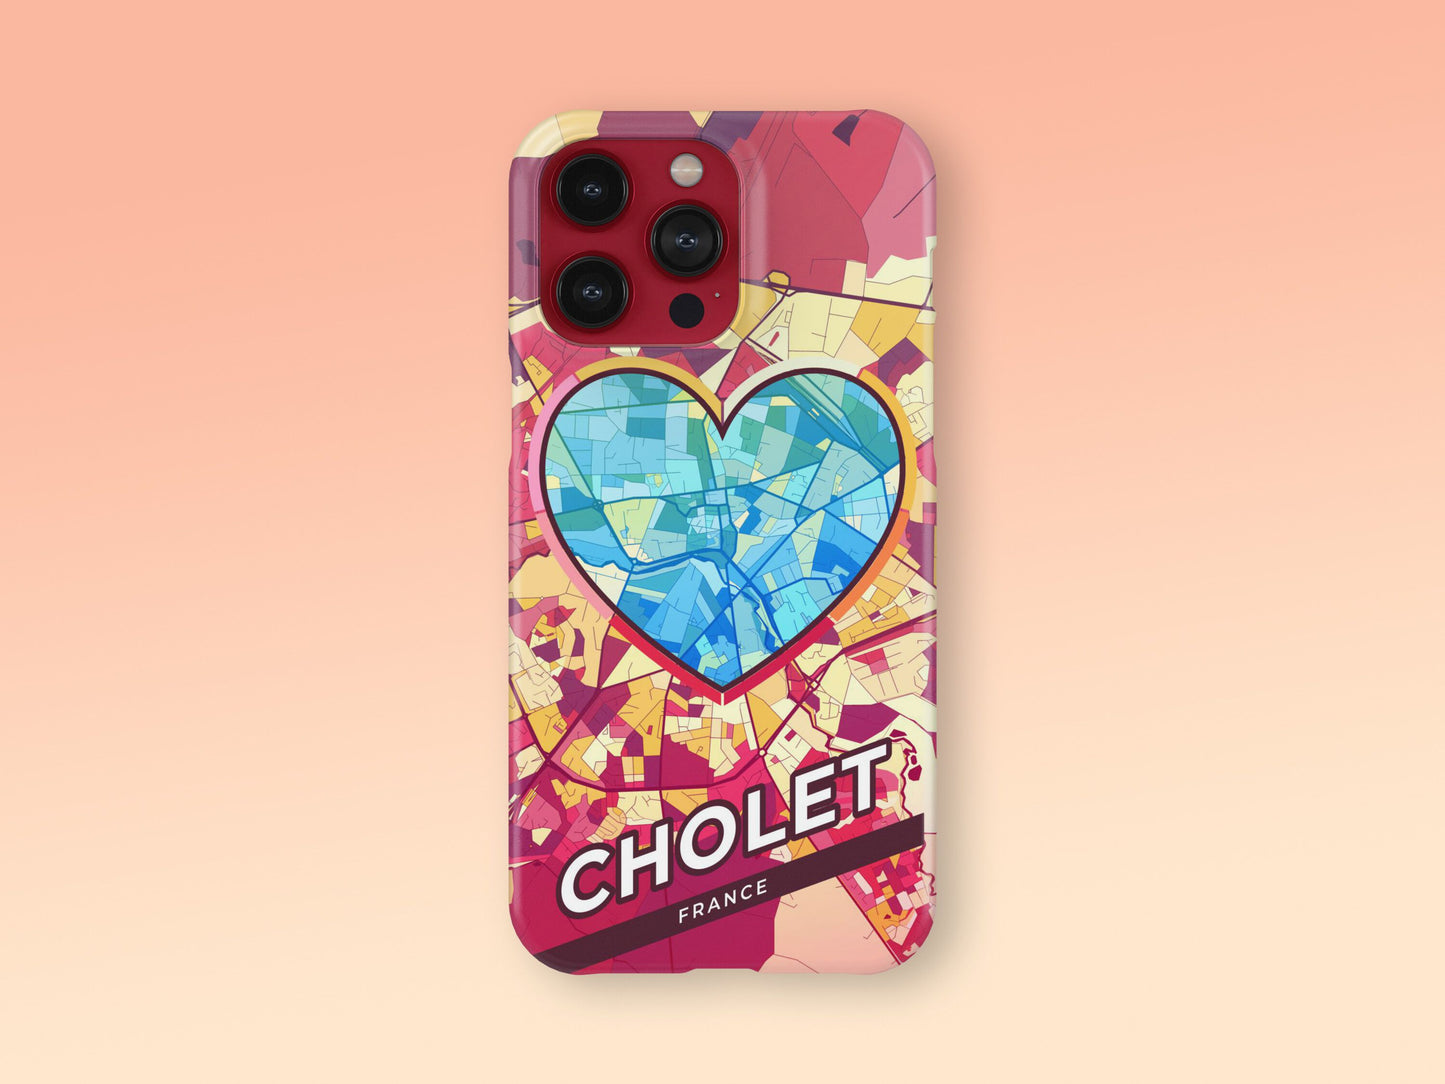 Cholet France slim phone case with colorful icon. Birthday, wedding or housewarming gift. Couple match cases. 2